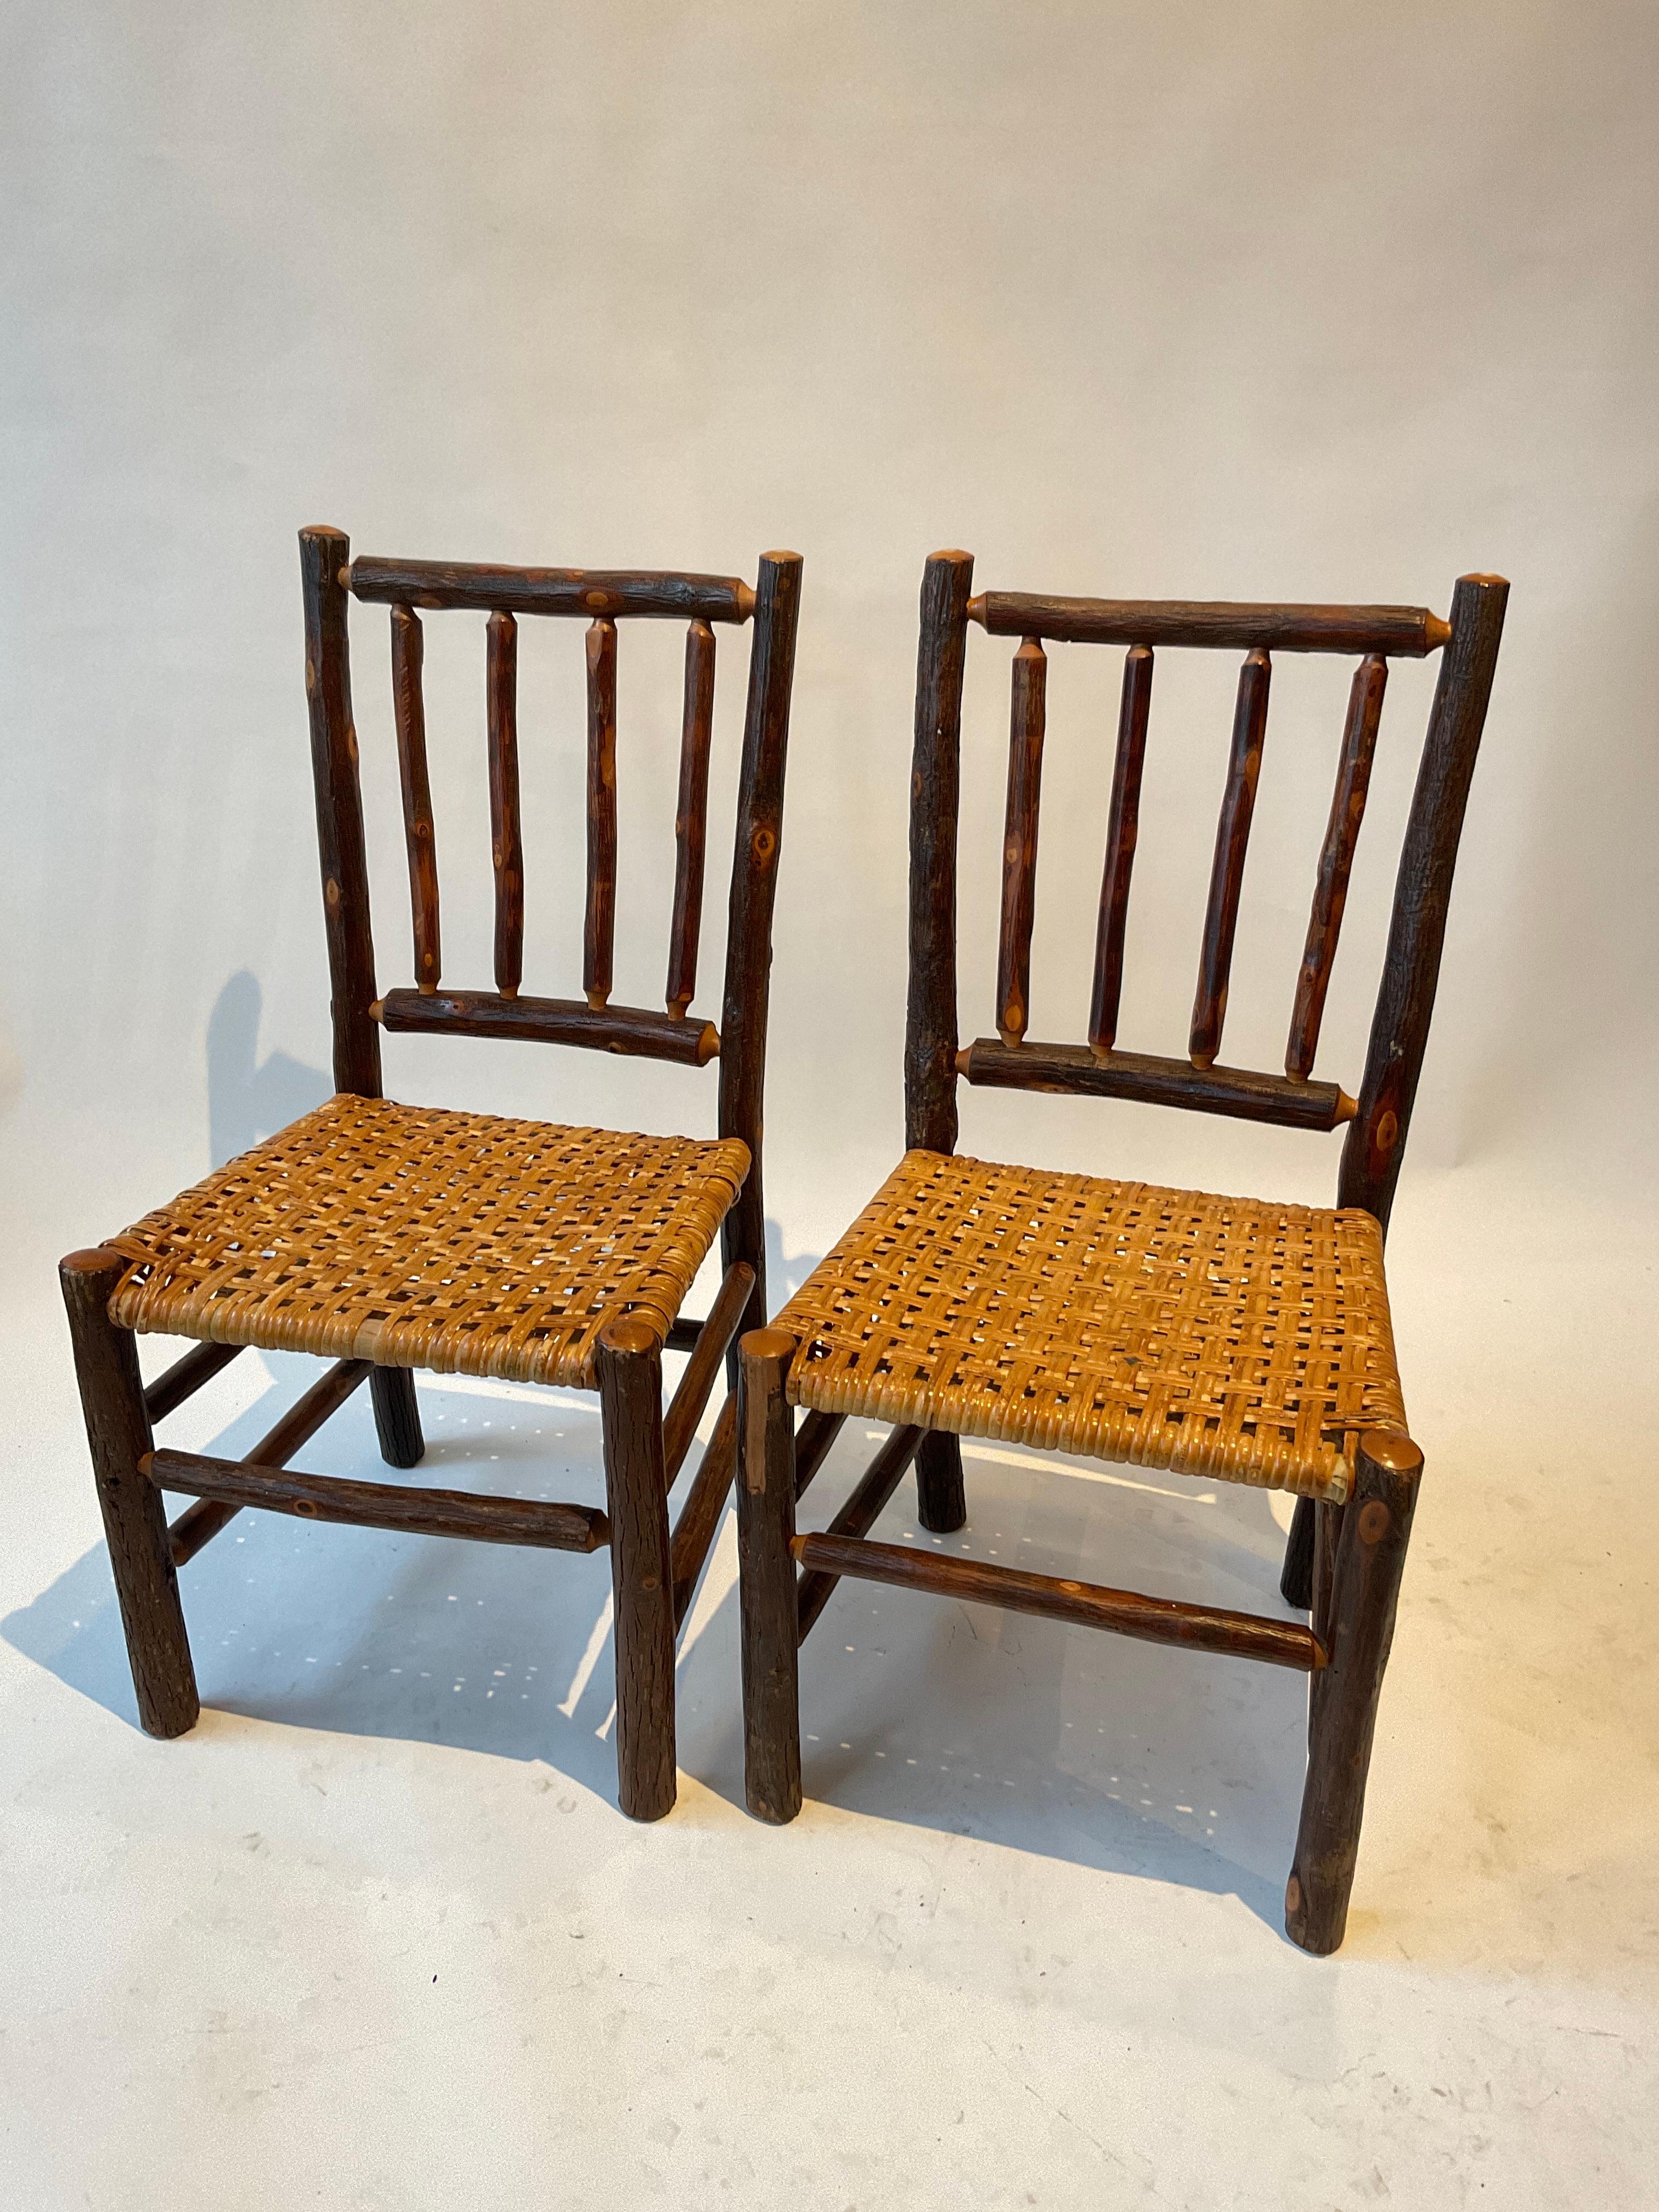 Pair of hickory wood Adirondack side chairs with wicker seats.